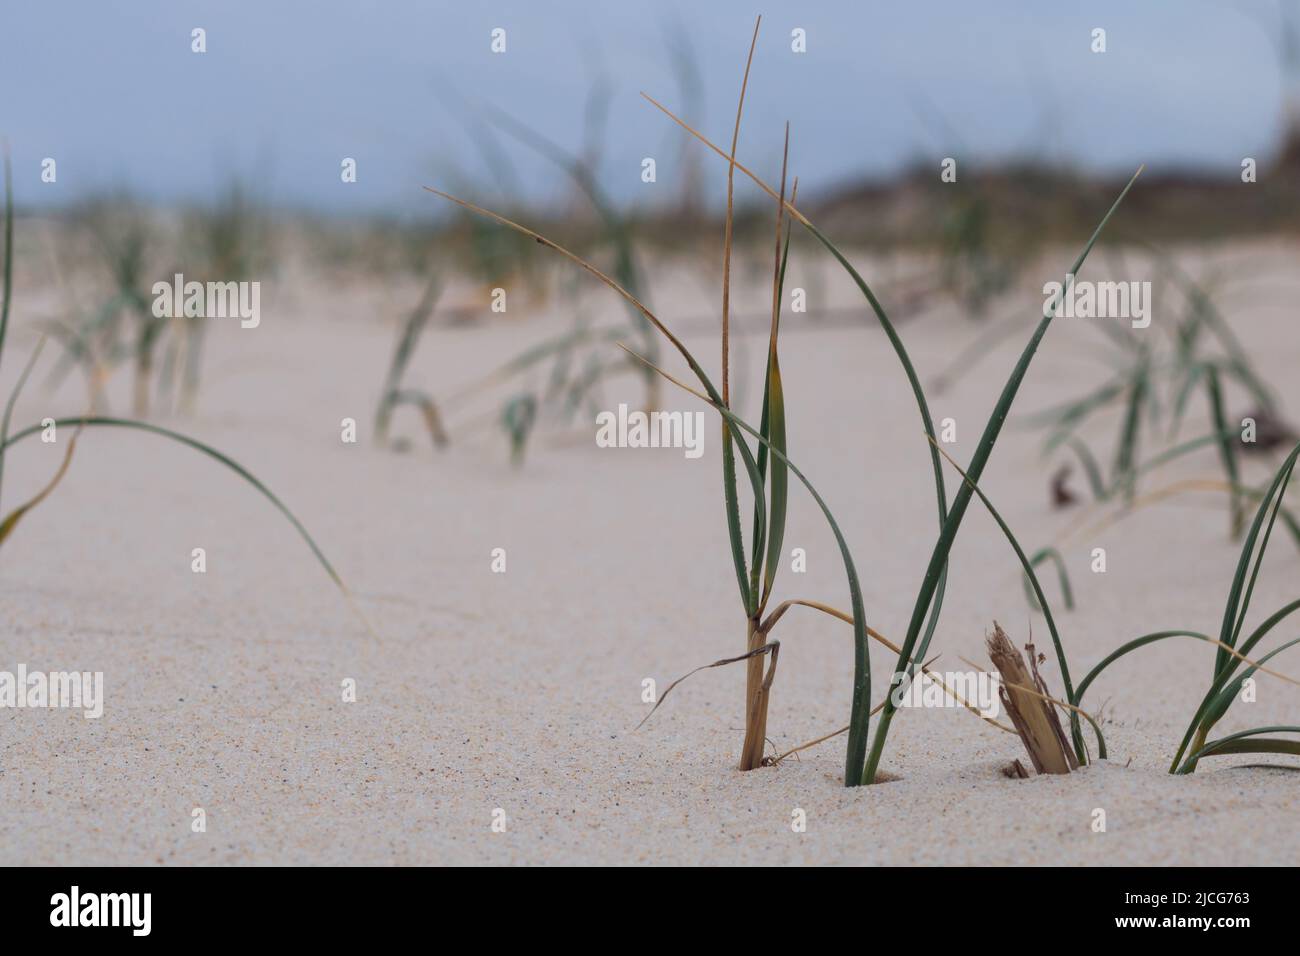 Close-up of sand with beach grass (Ammophila), also called marram grass, psamma or sand reed with selective focus and blurred background Stock Photo